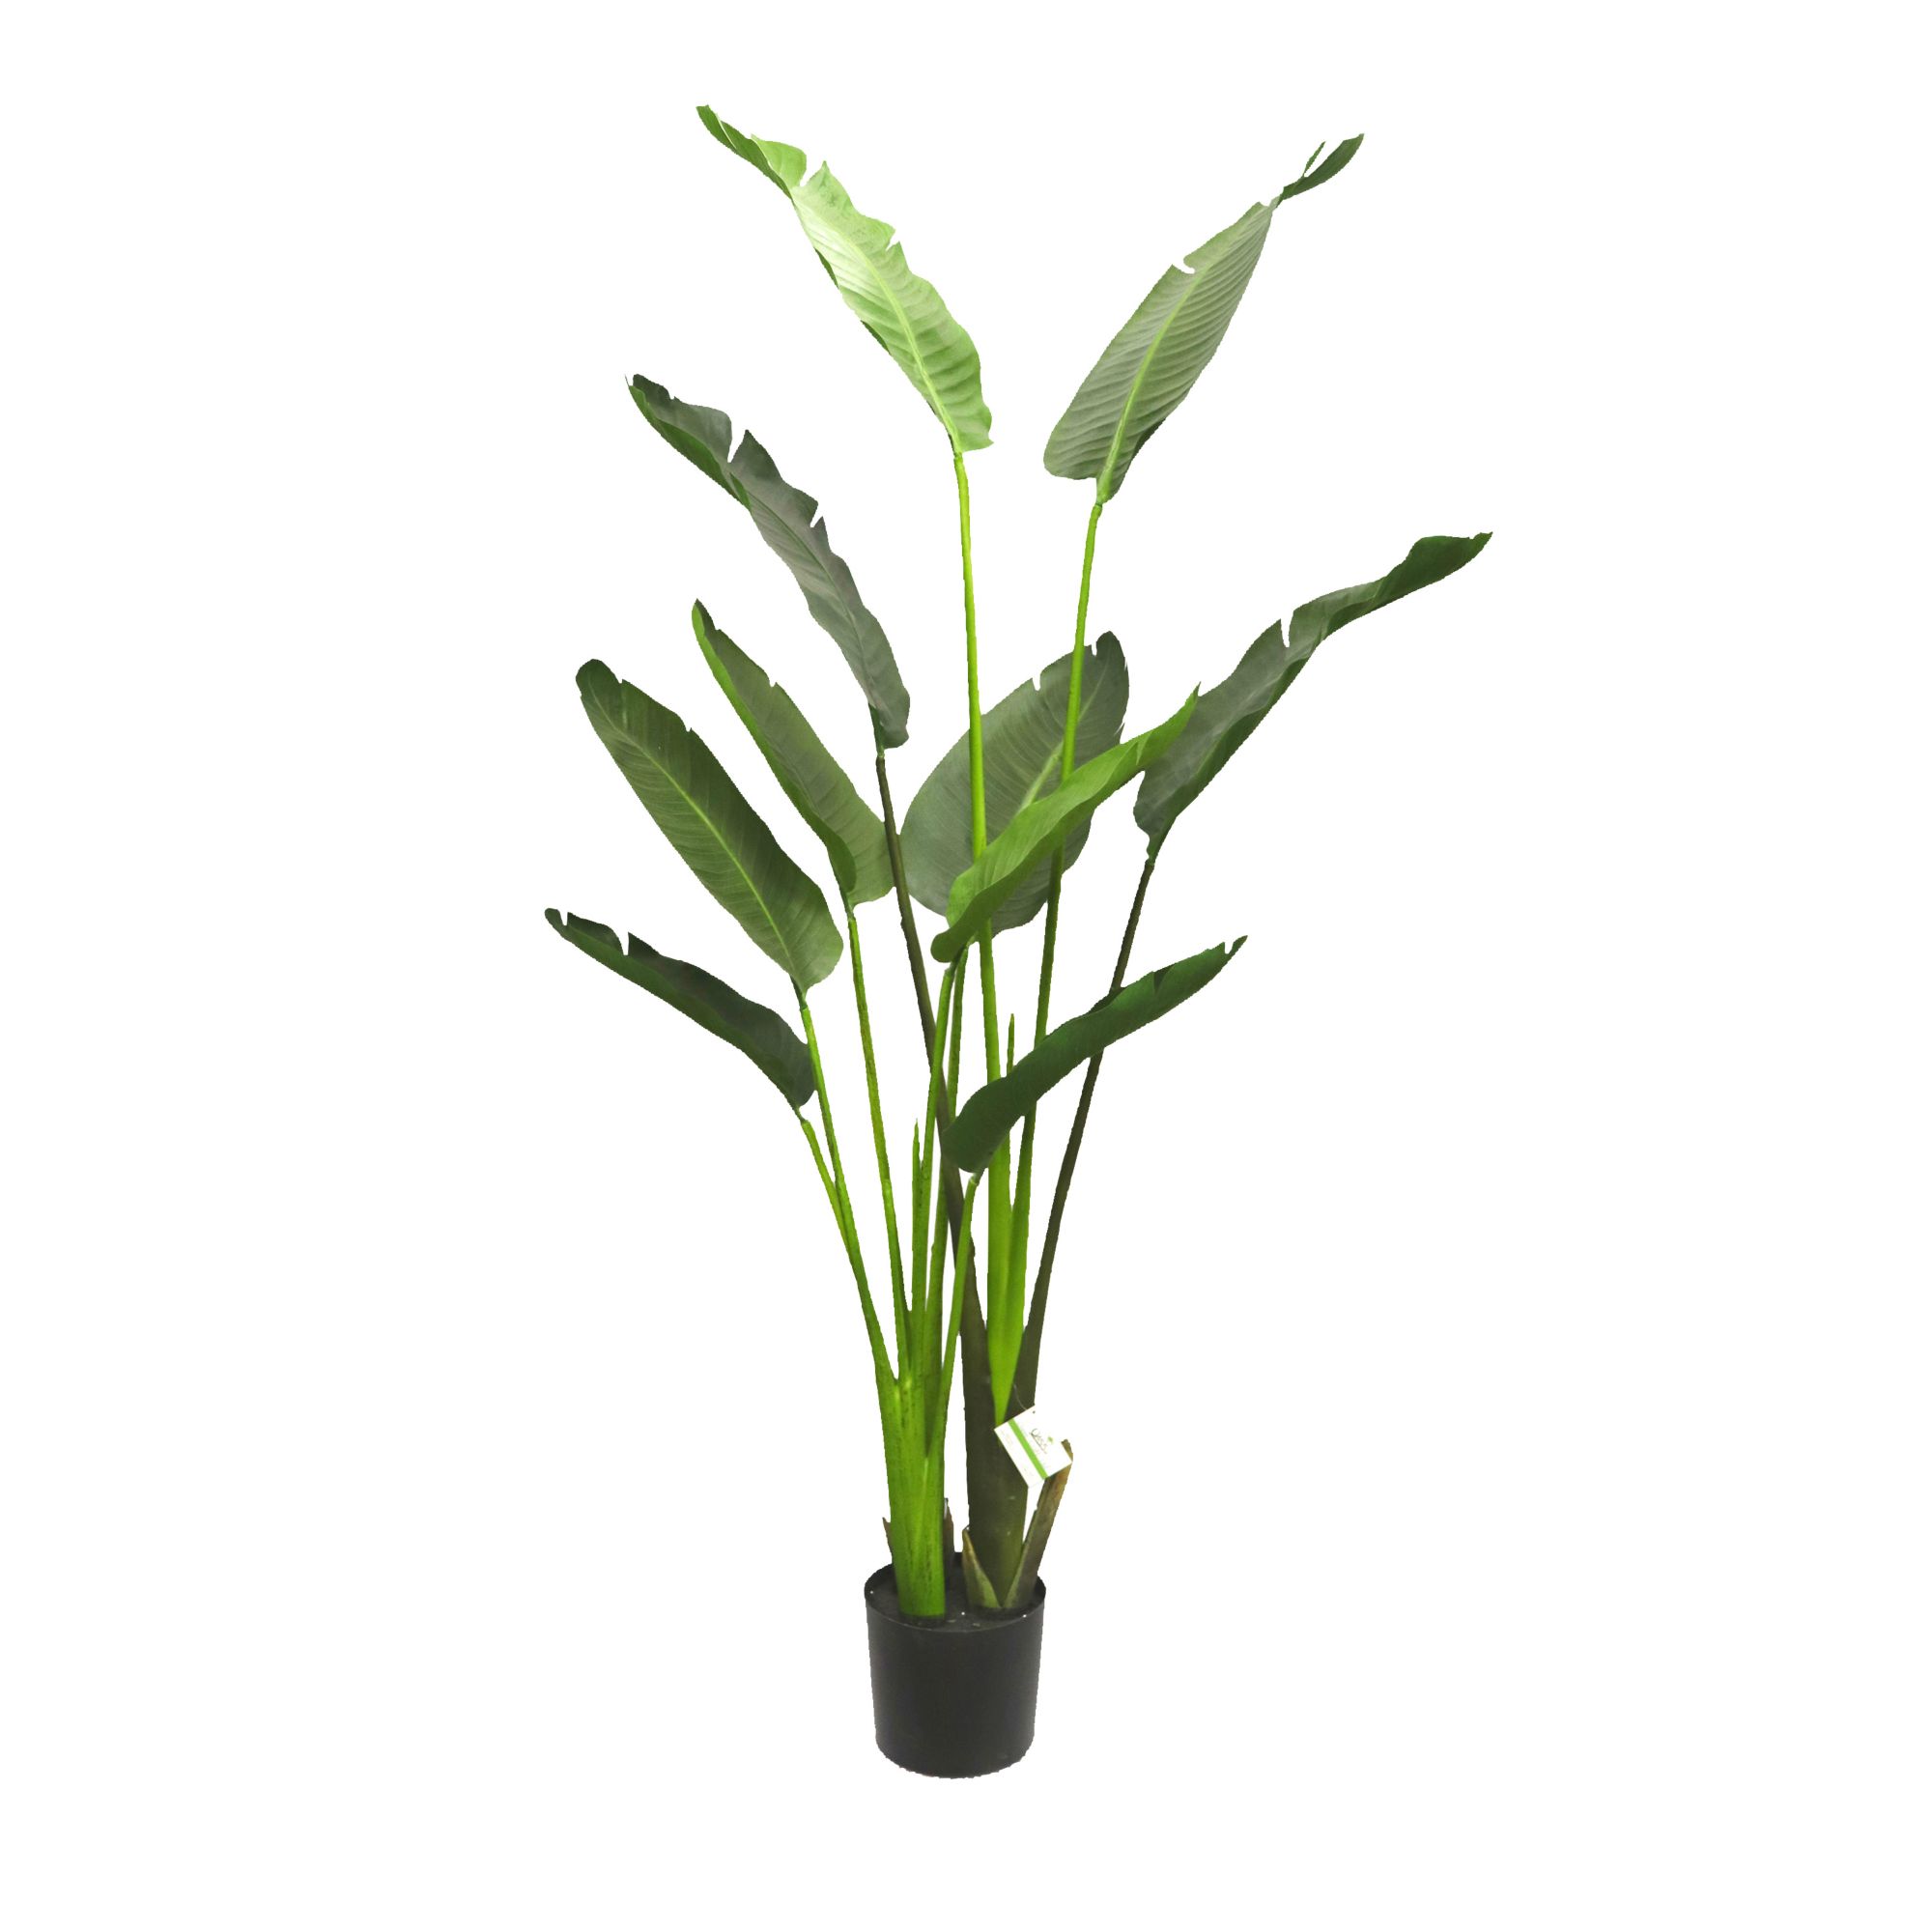 Winward 5' Potted Travelers Palm Decorative Artificial Plant